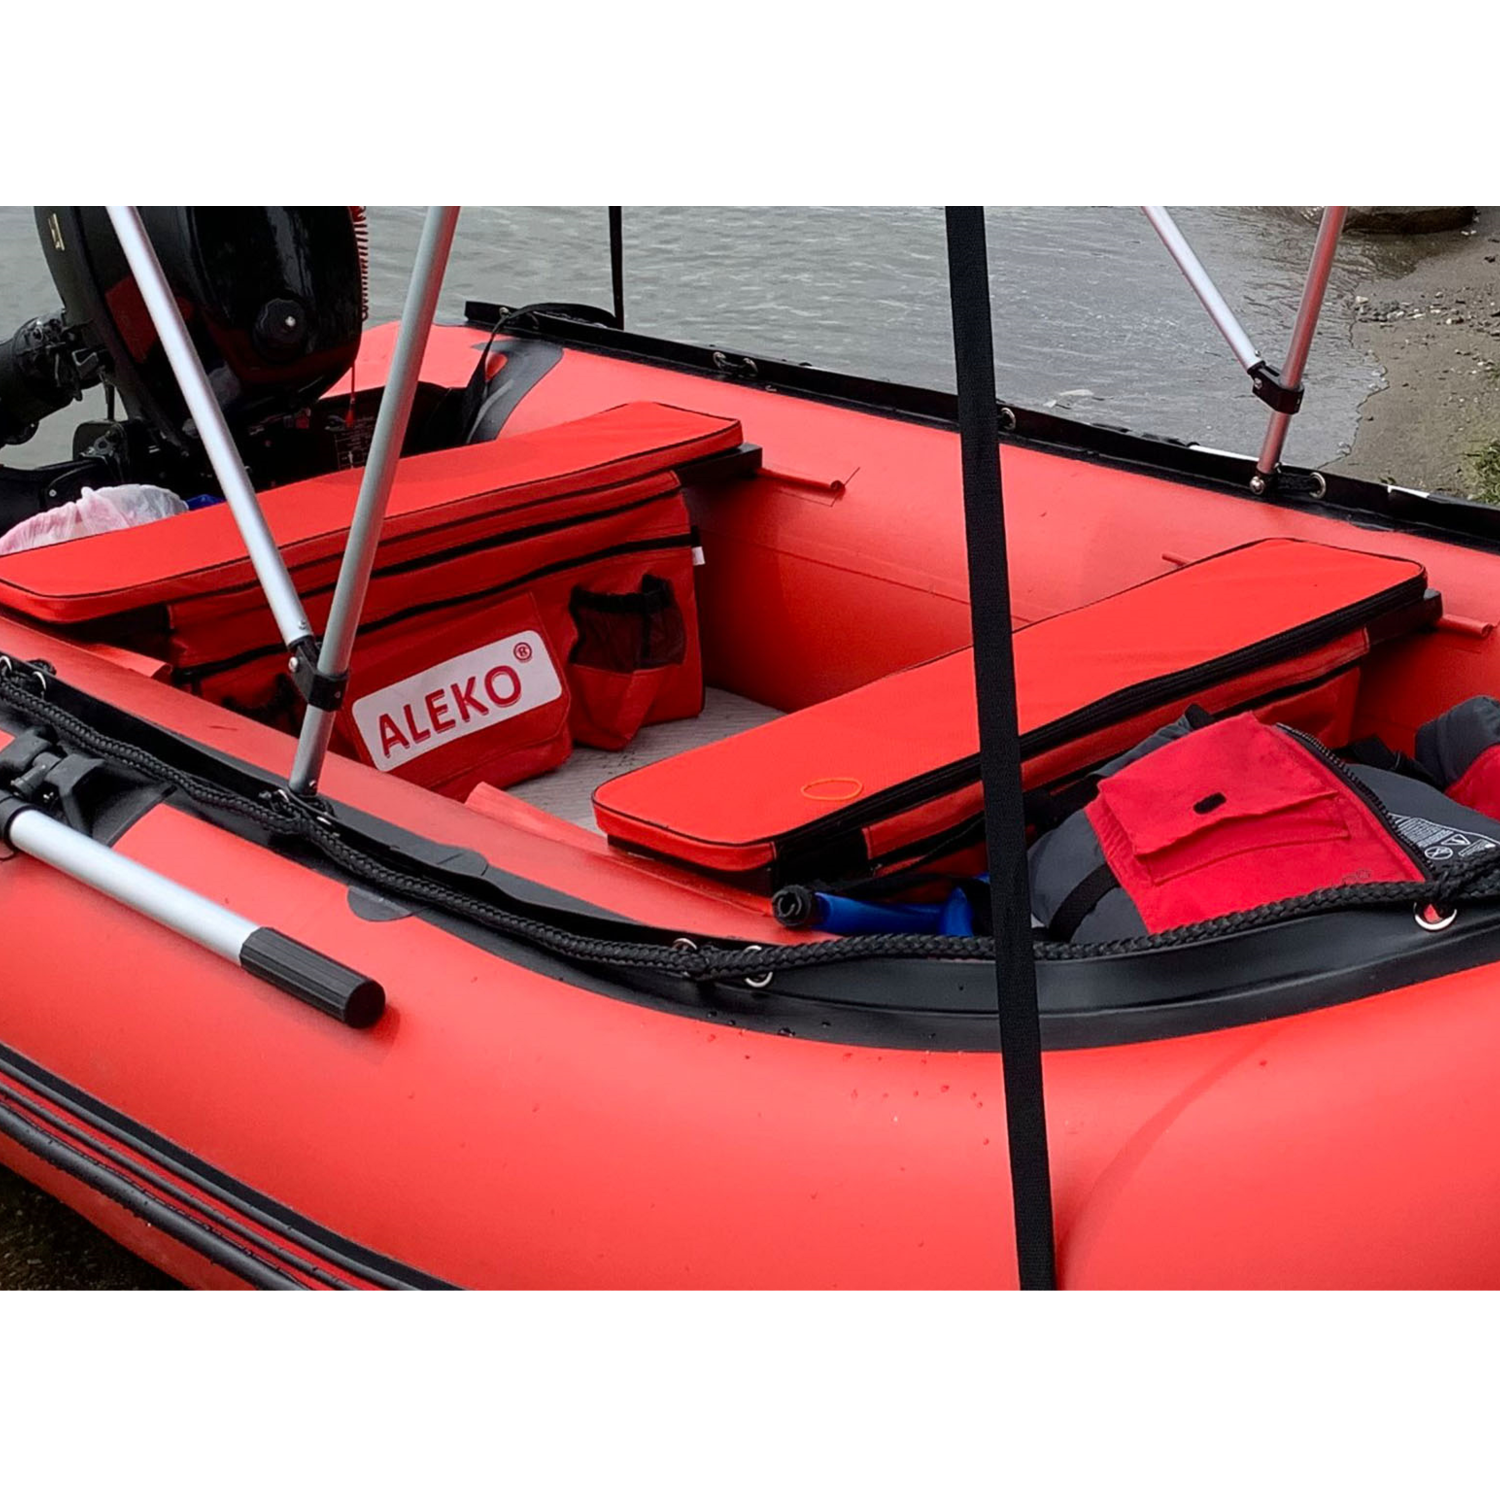 Aleko Inflatable Boat Seat Cushion 34x9 Red with Under Seat Bag